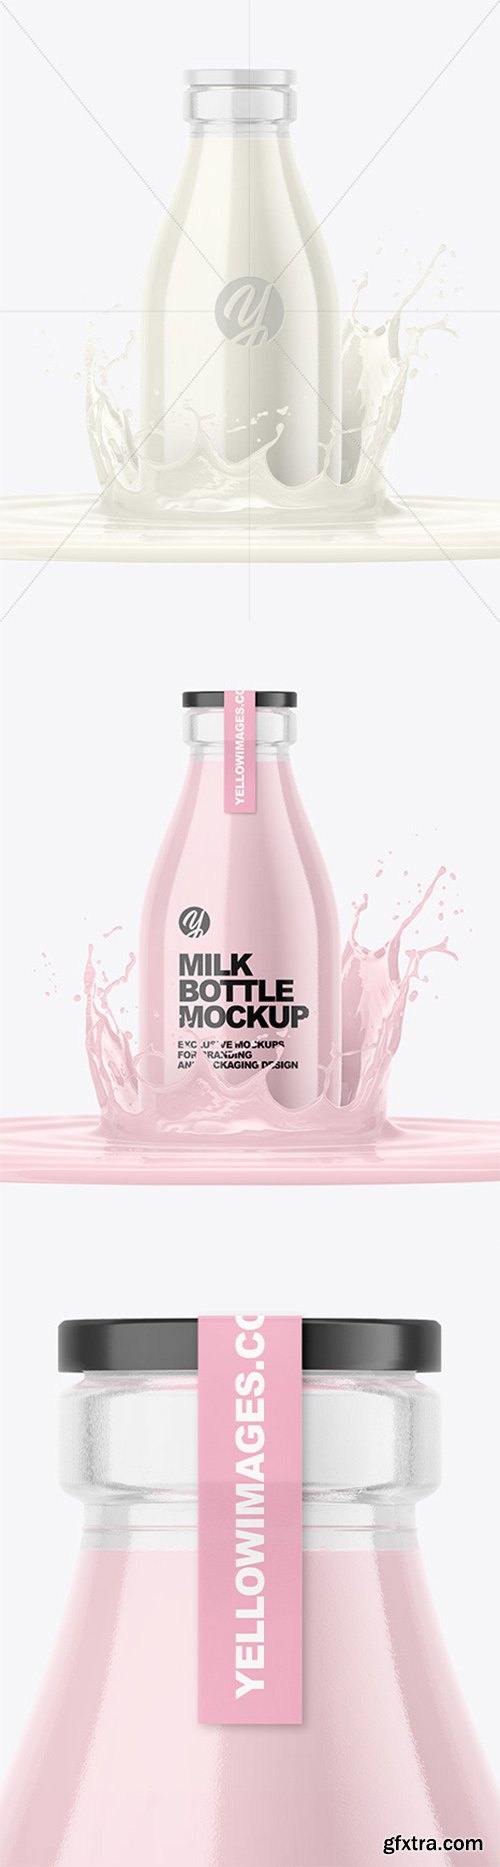 Clear Glass Dairy Bottle with Splash Mockup 61529